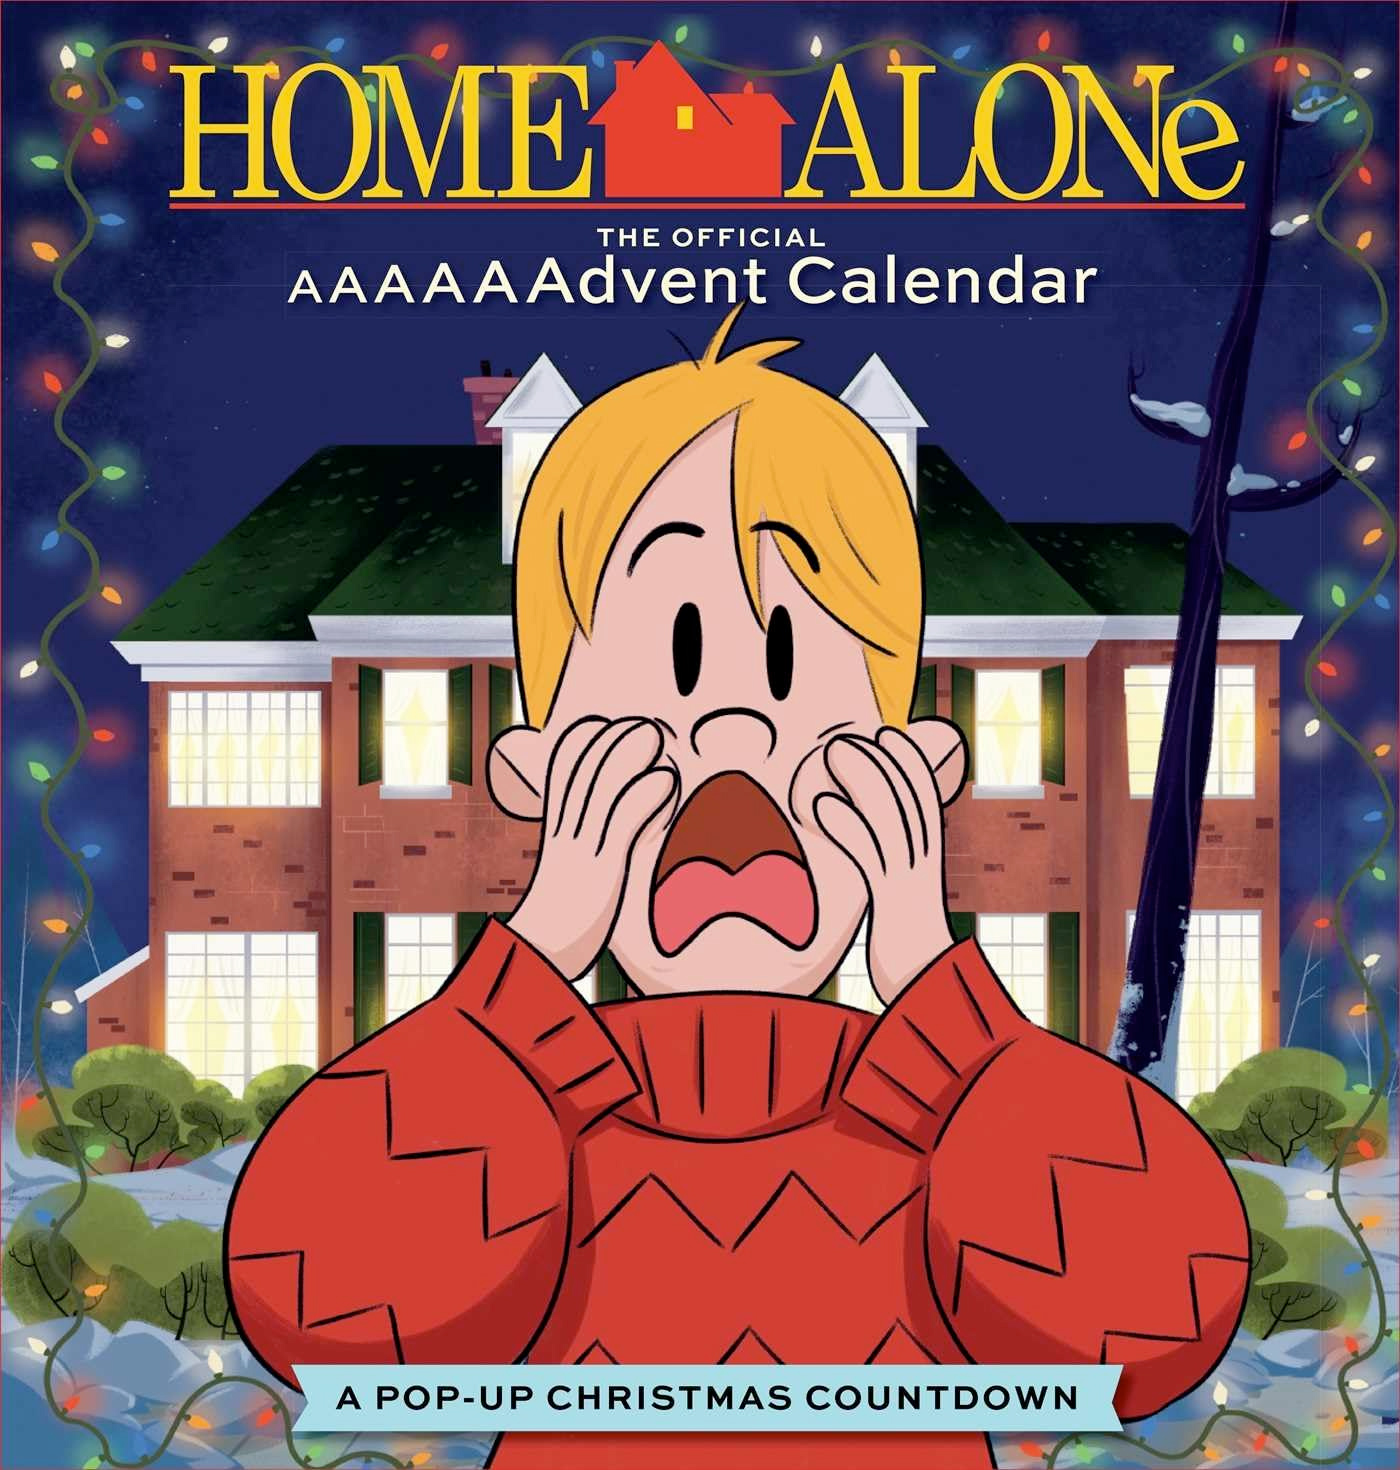 AAAAA Advent Calendar They Forgot Me (Home Alone)